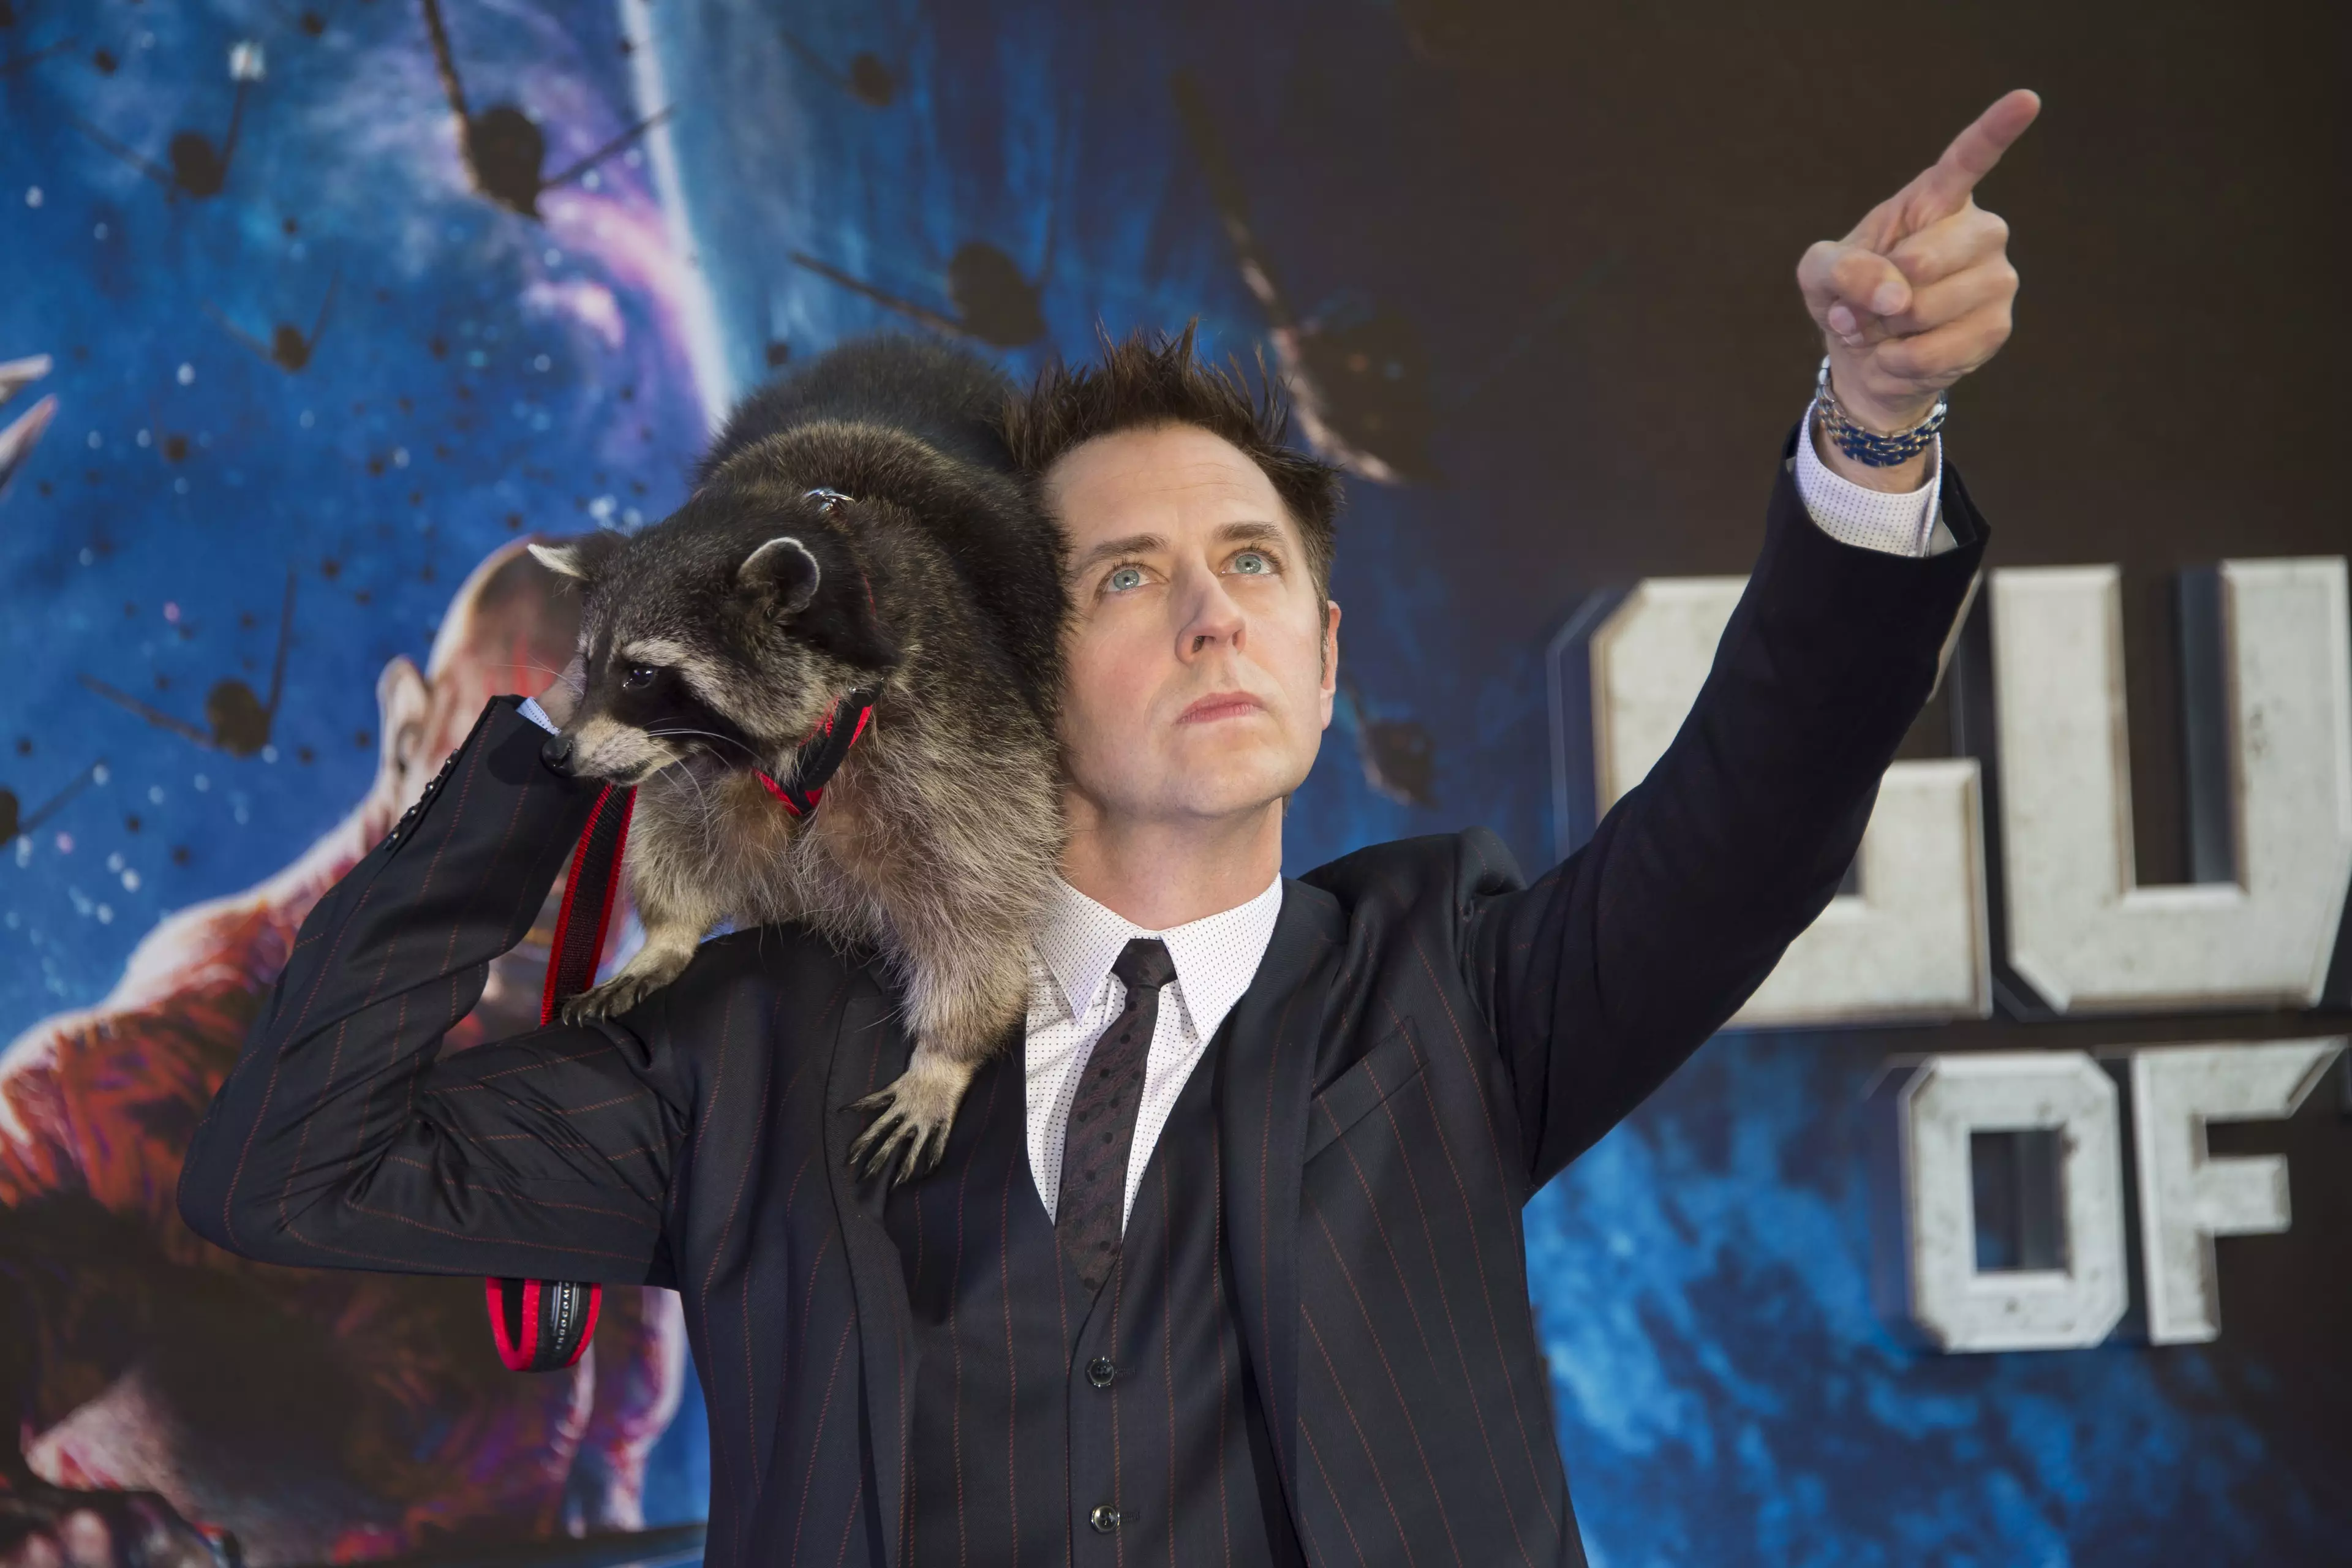 Gunn was allowed back for the third Guardians of the Galaxy flick.